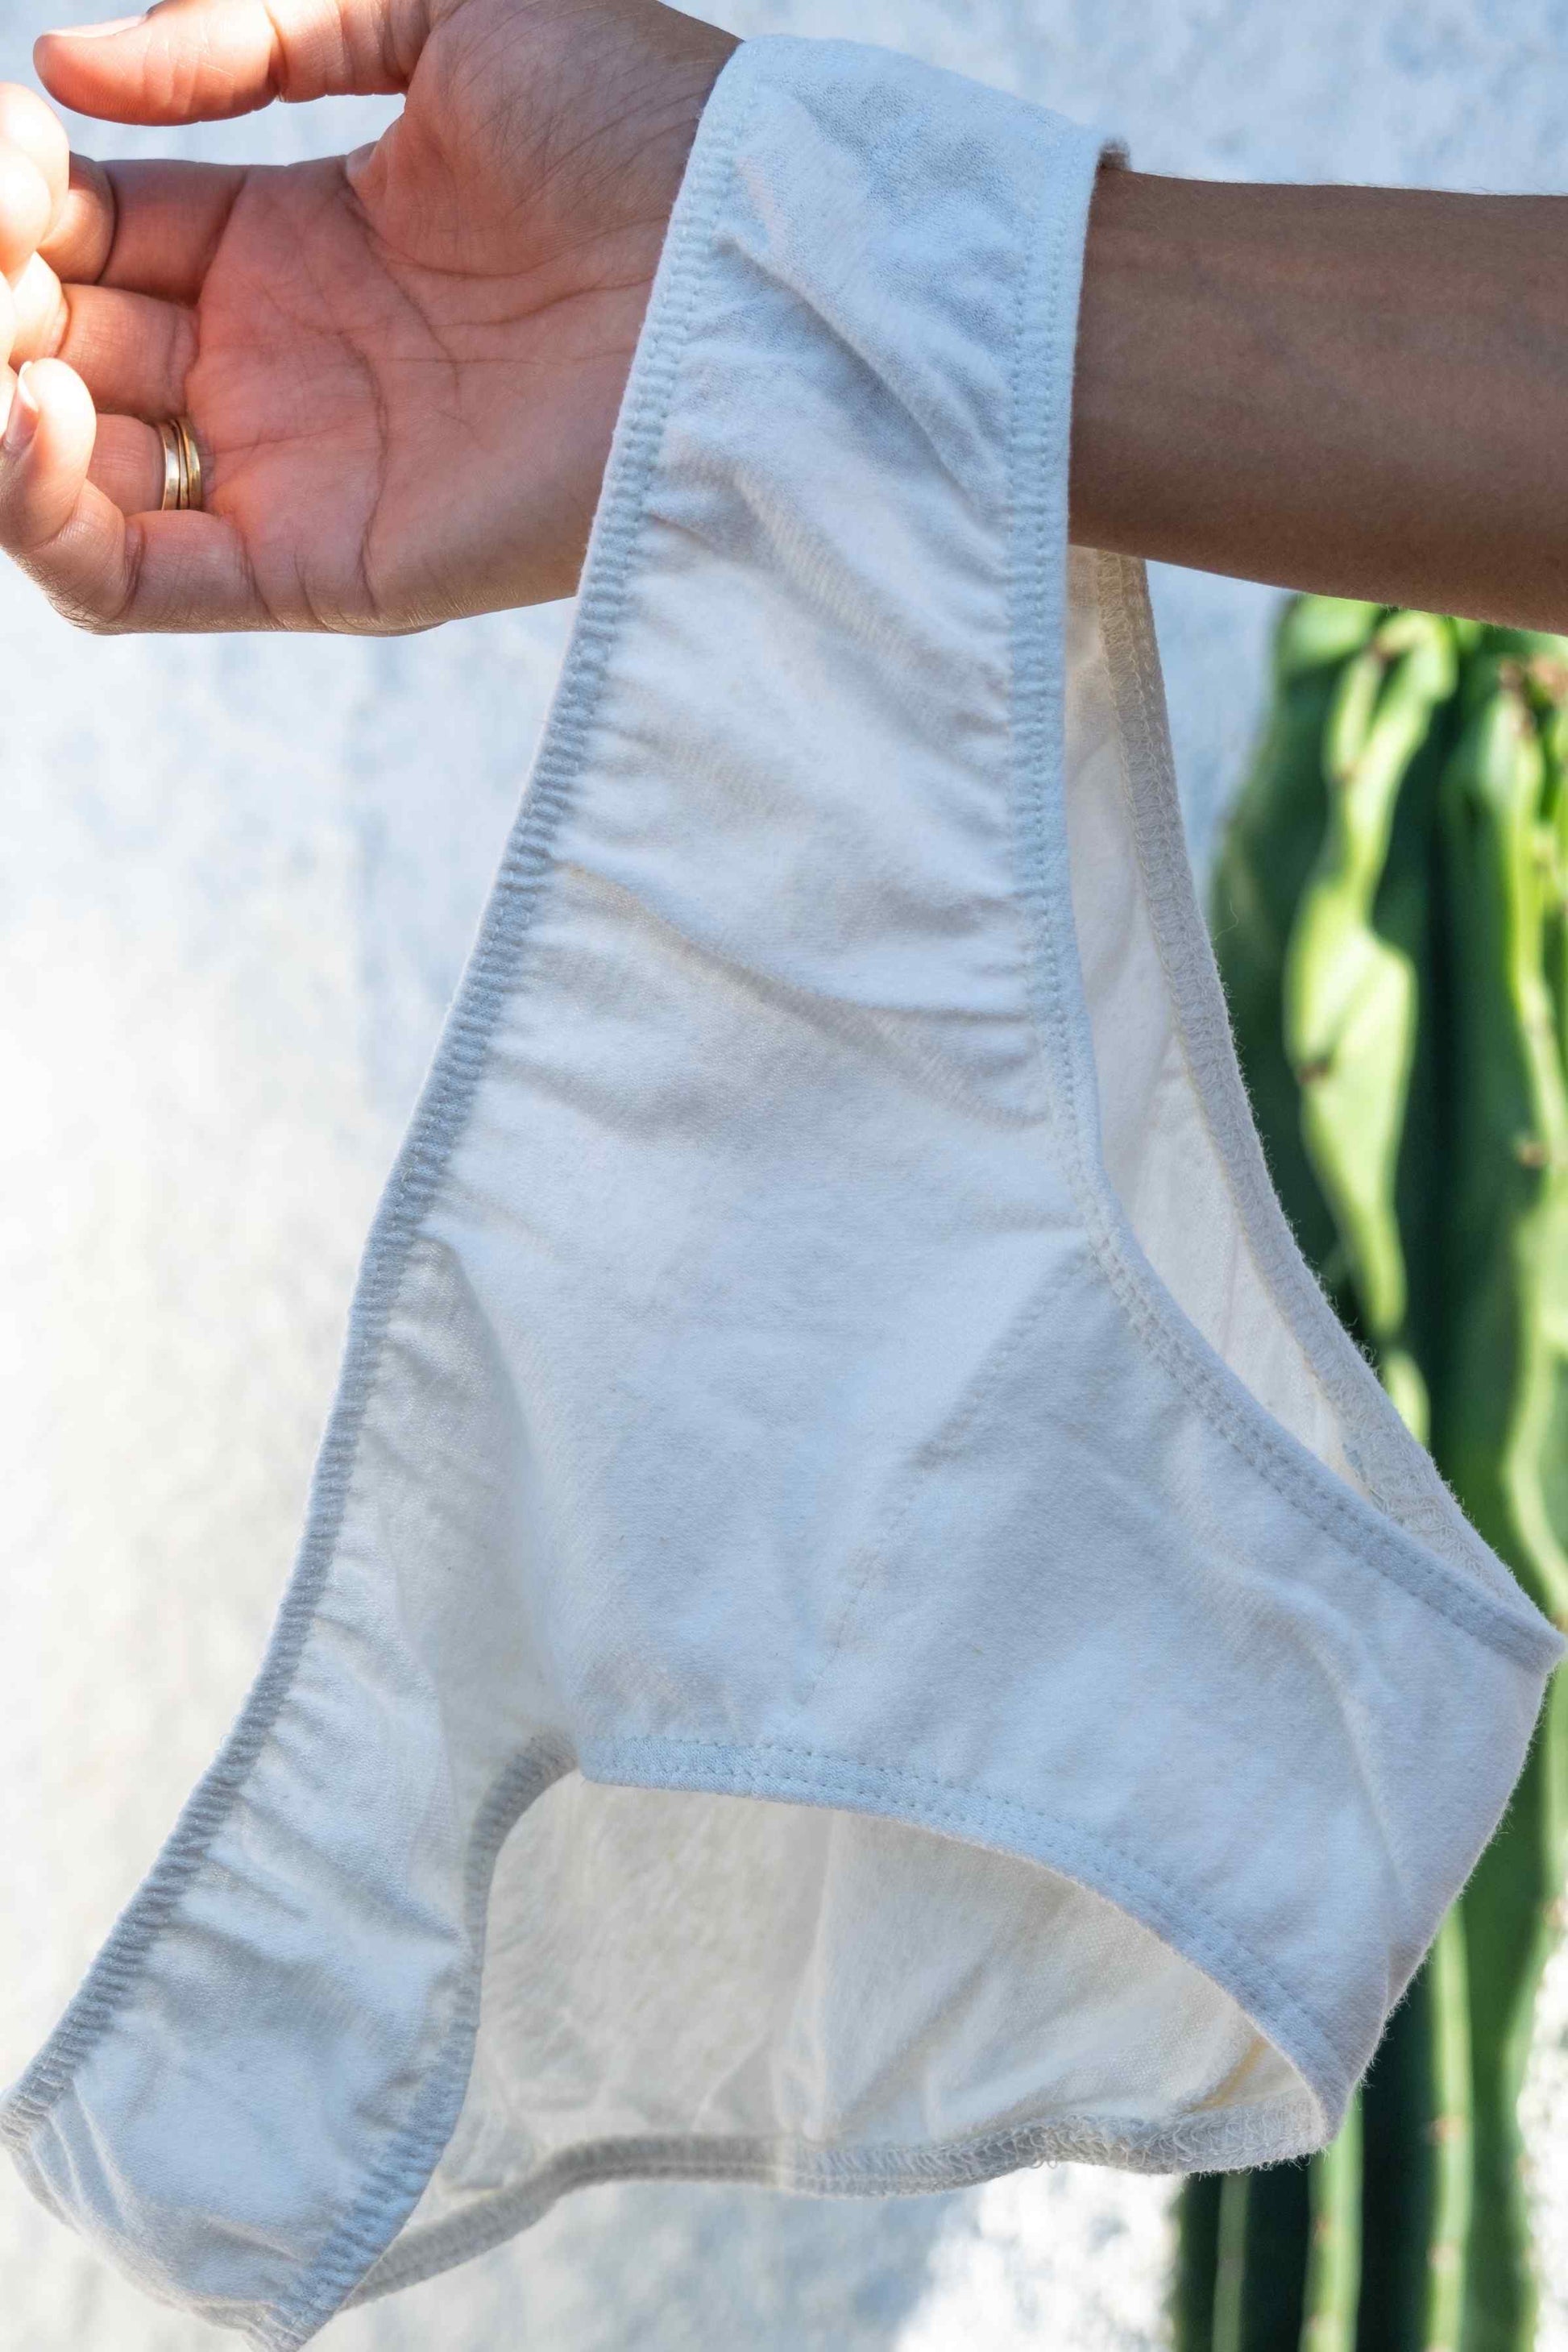 Women's Organic Cotton Full Briefs - Natural Clothing Company